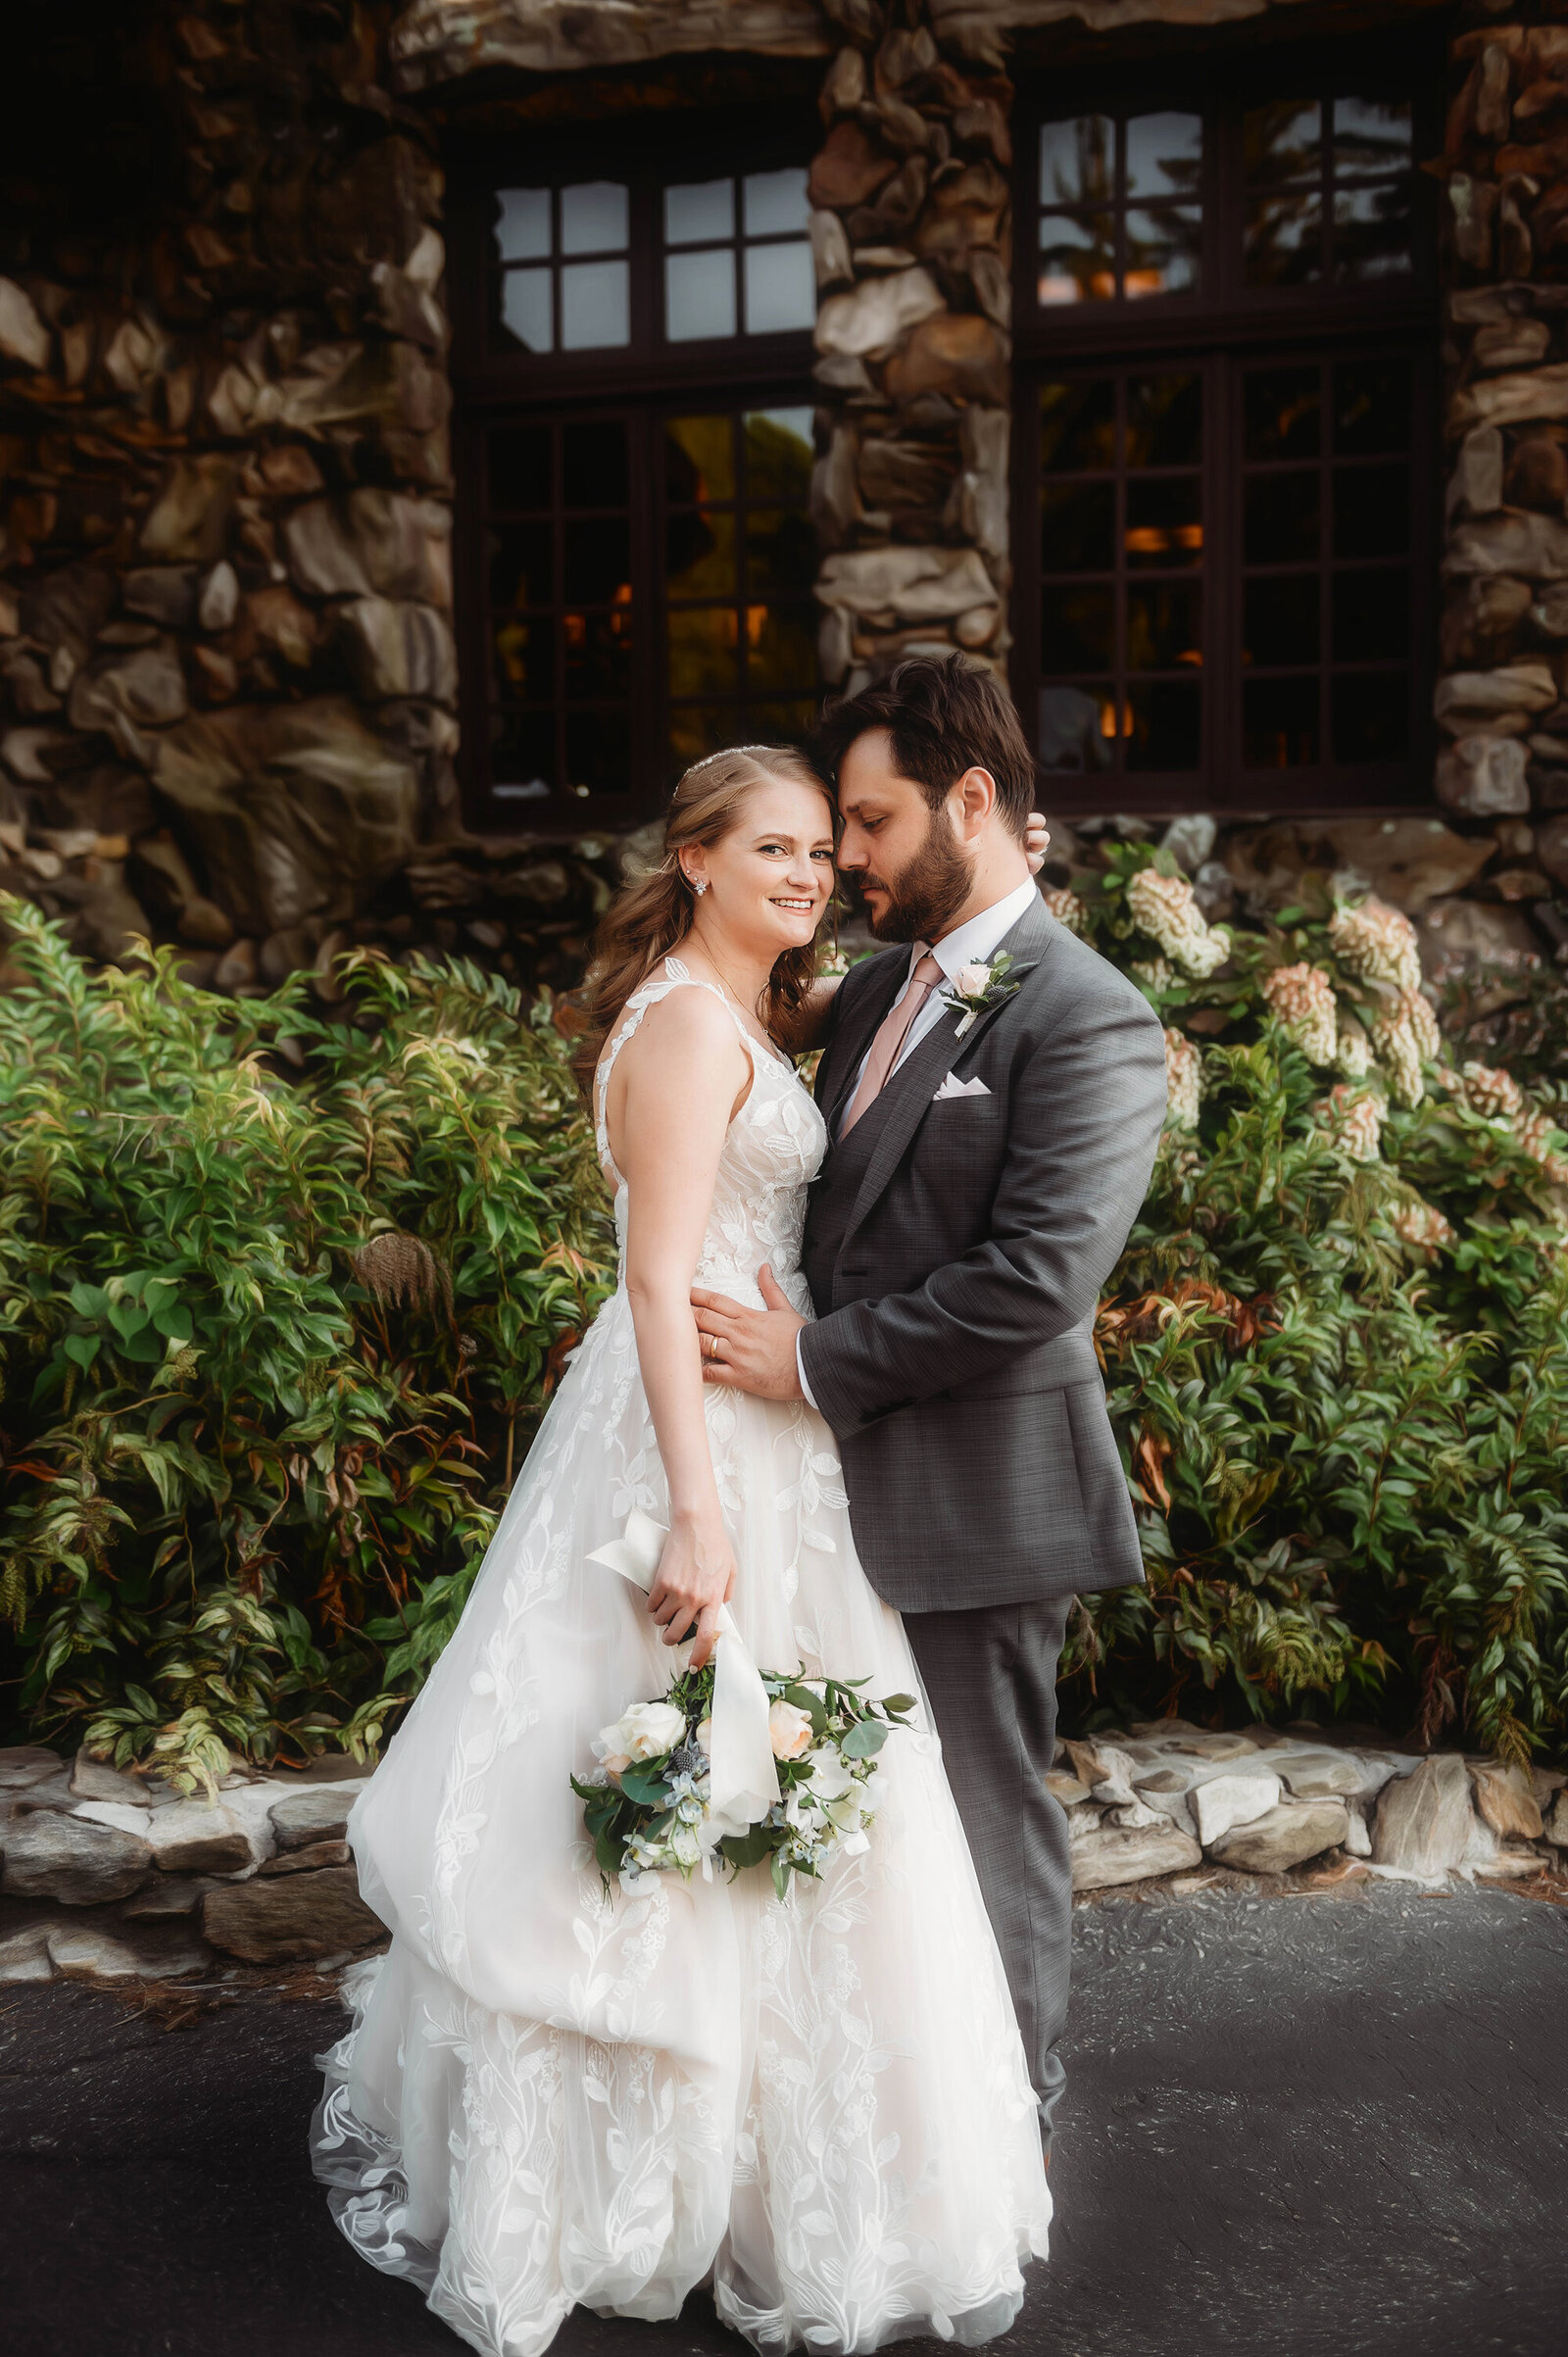 Bride and Groom embrace for Newlywed Portraits after their Micro Wedding Ceremony at Grove Park Inn in Asheville, NC.